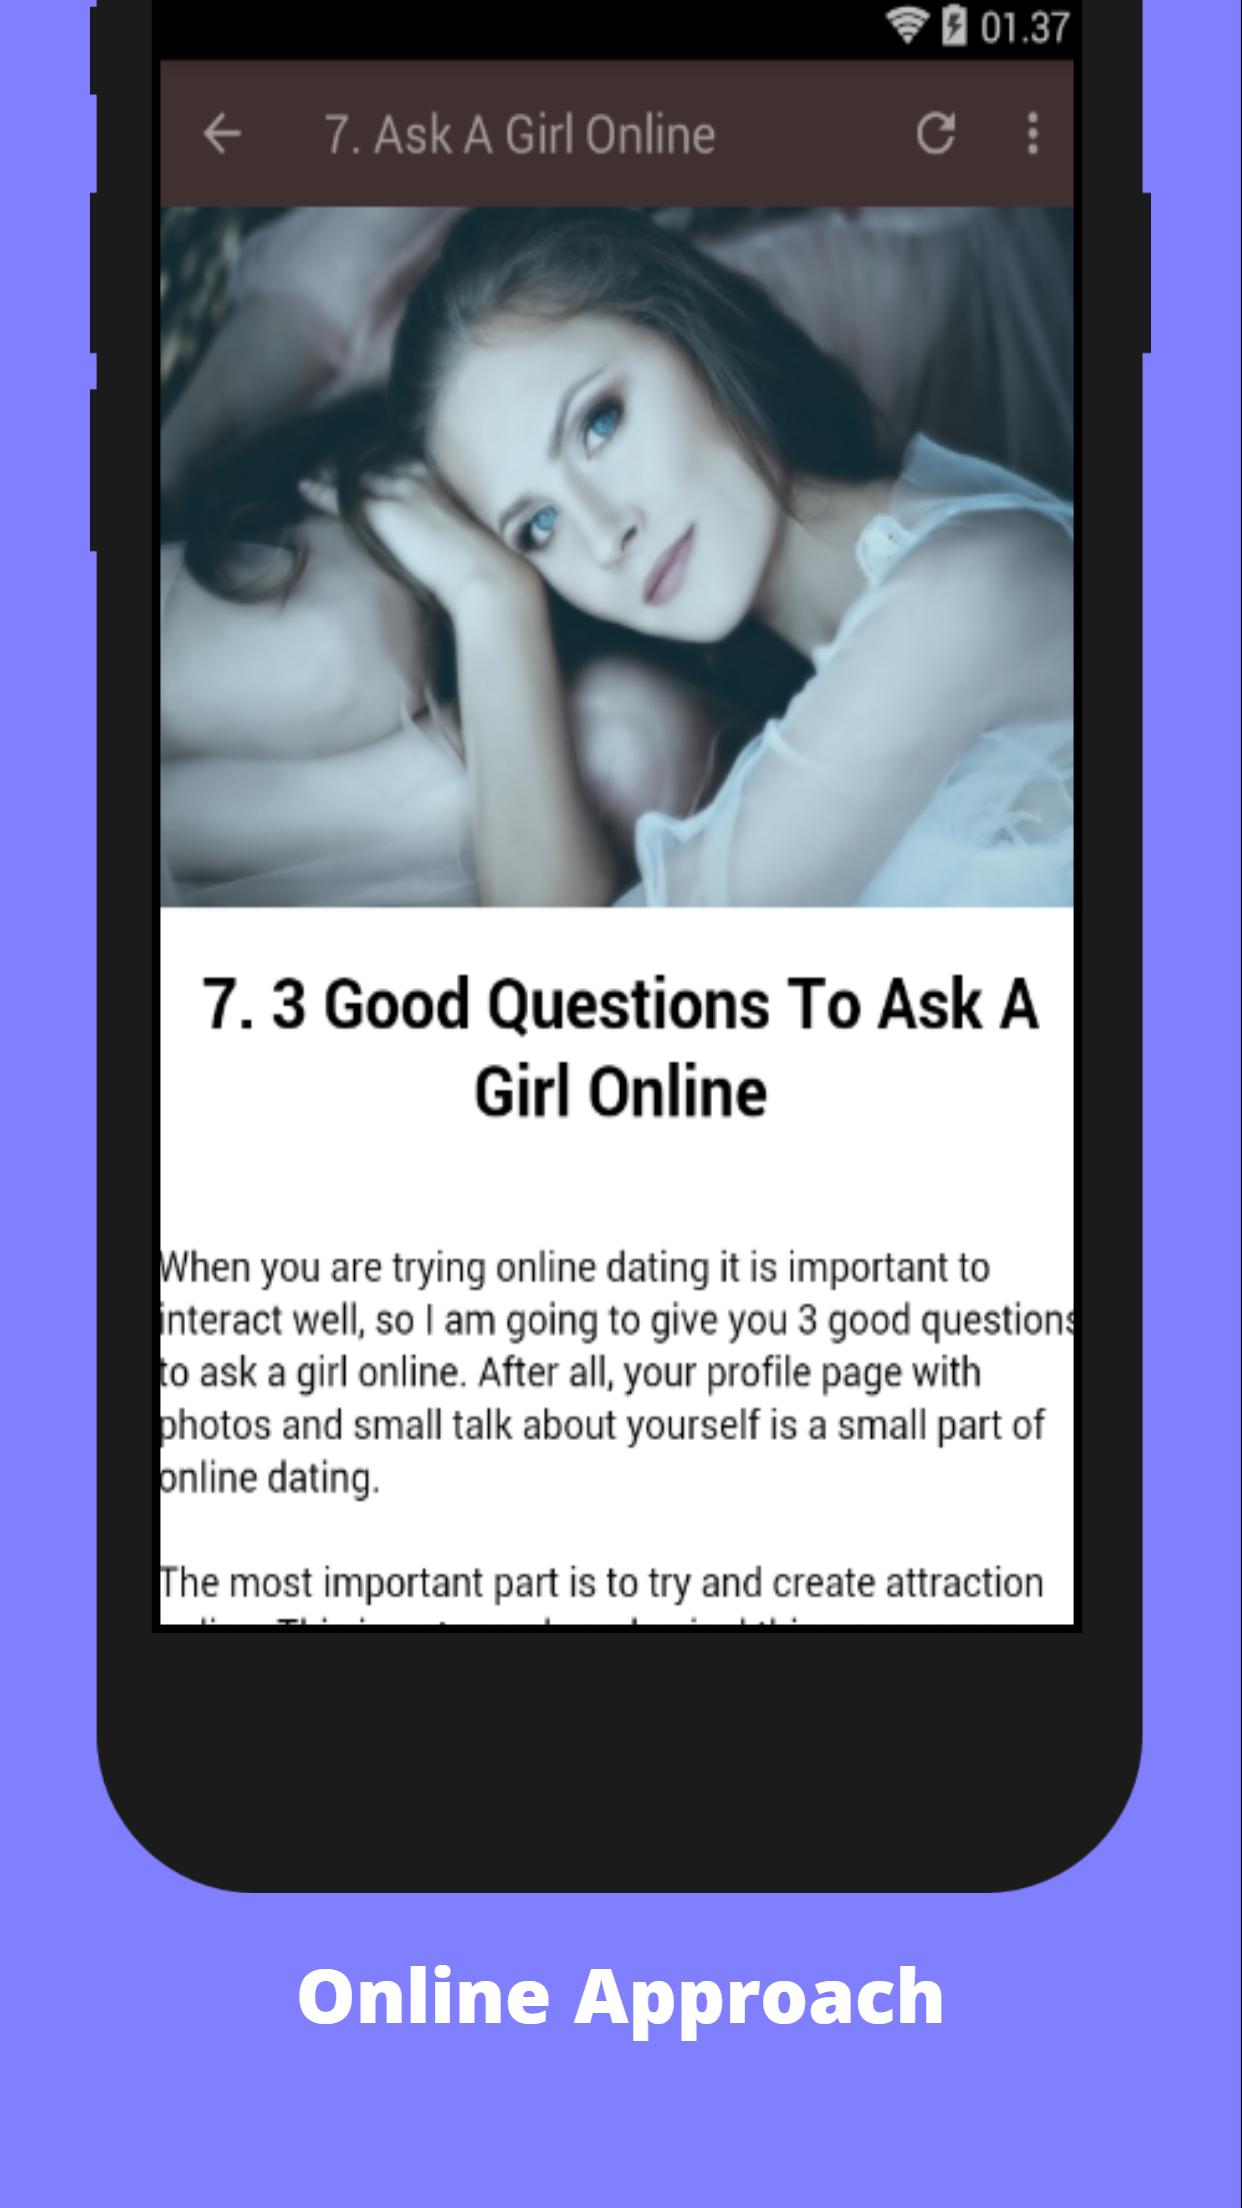 Flirty Questions To Ask A Girl For Android APK Download.